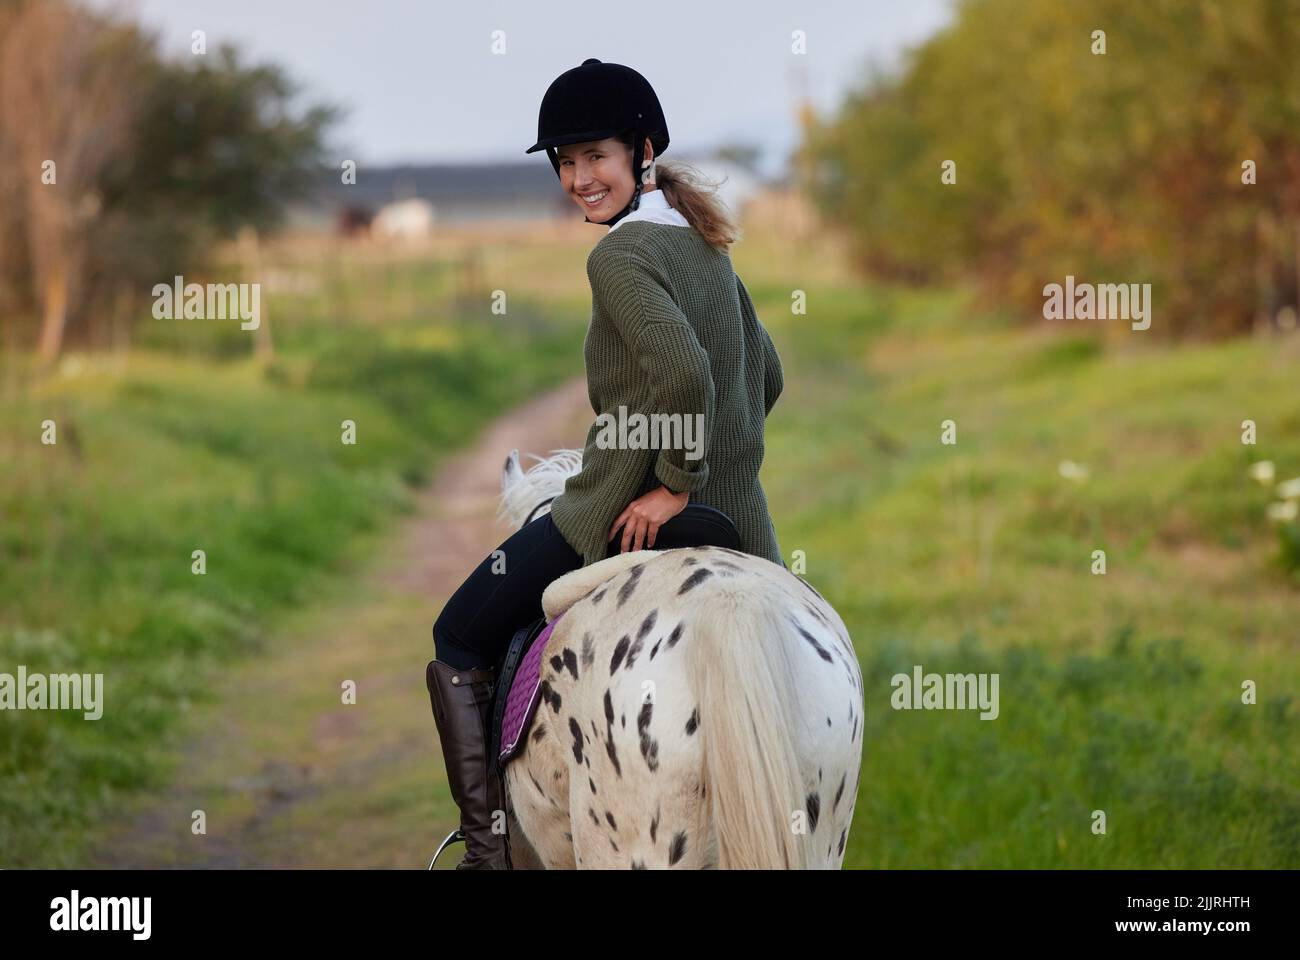 The essential joy of being with horses. a young woman riding her horses outside on a field. Stock Photo